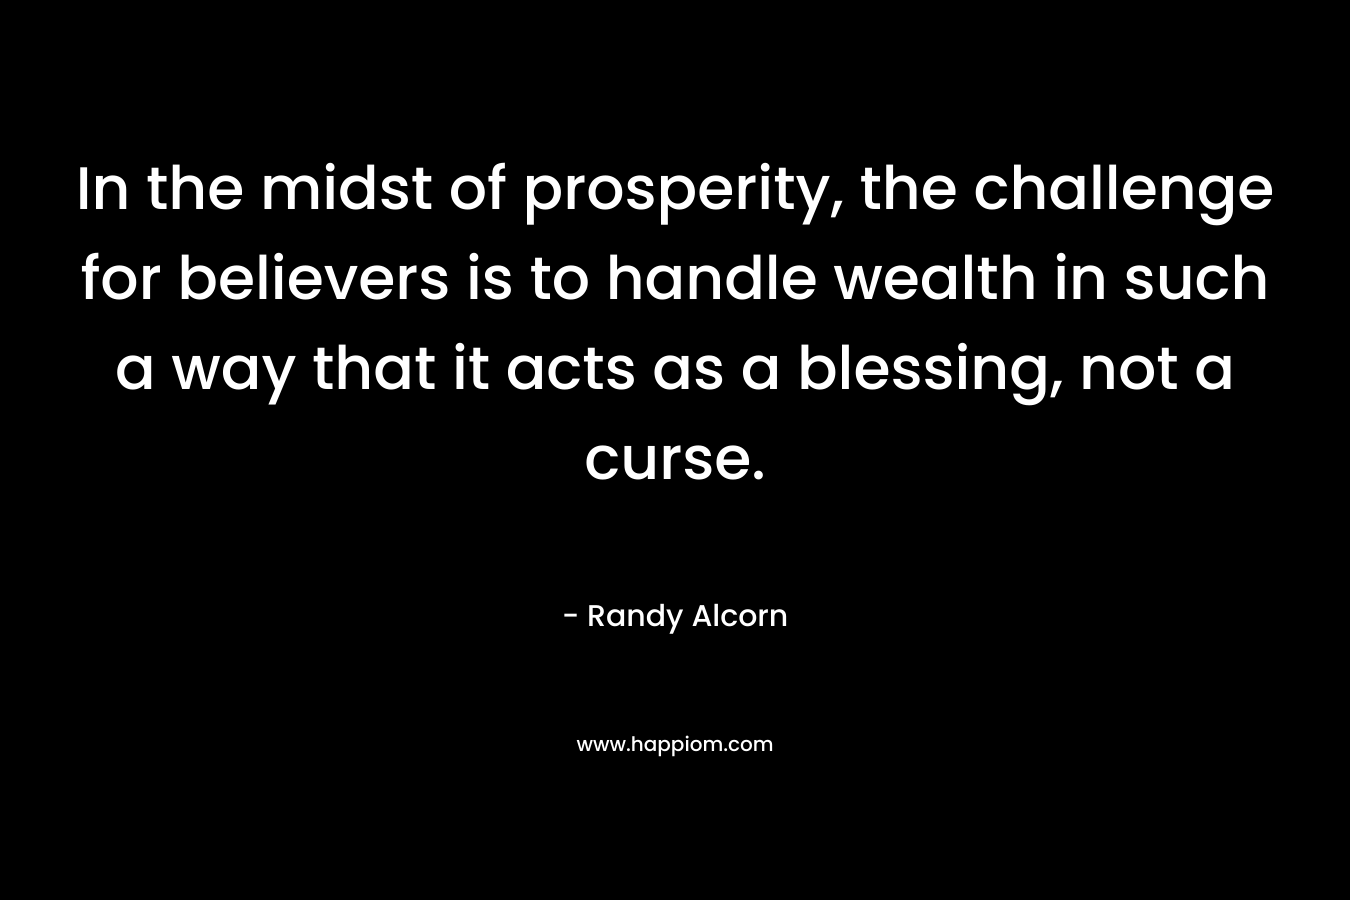 In the midst of prosperity, the challenge for believers is to handle wealth in such a way that it acts as a blessing, not a curse.